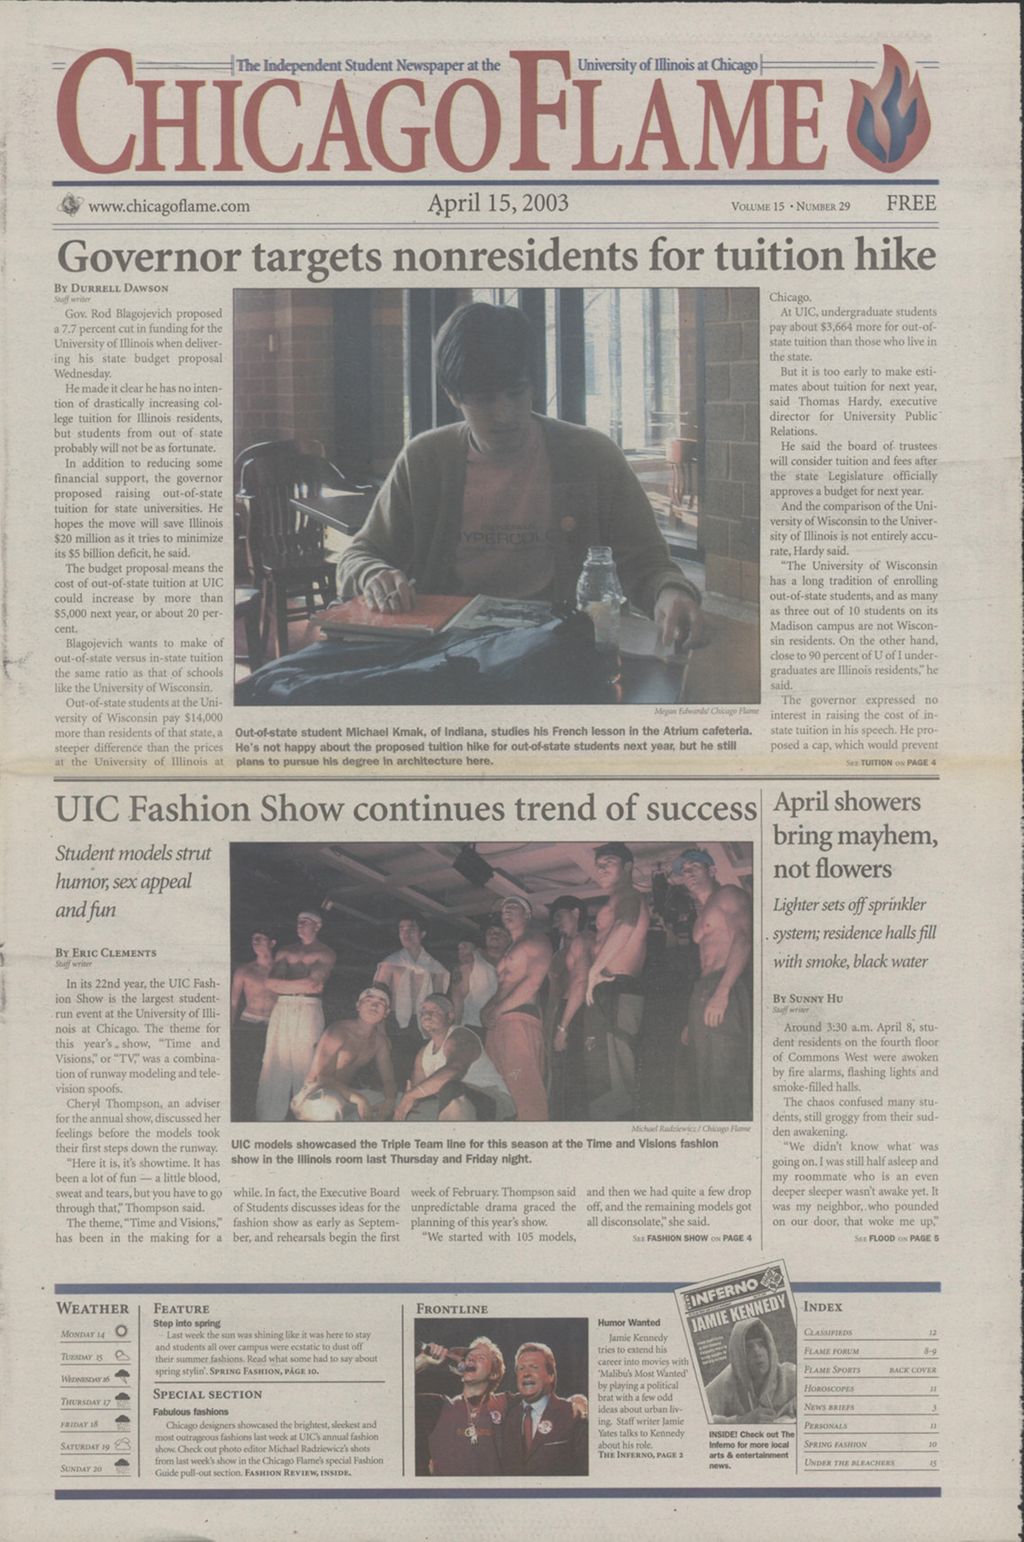 Chicago Flame (April 15, 2003)